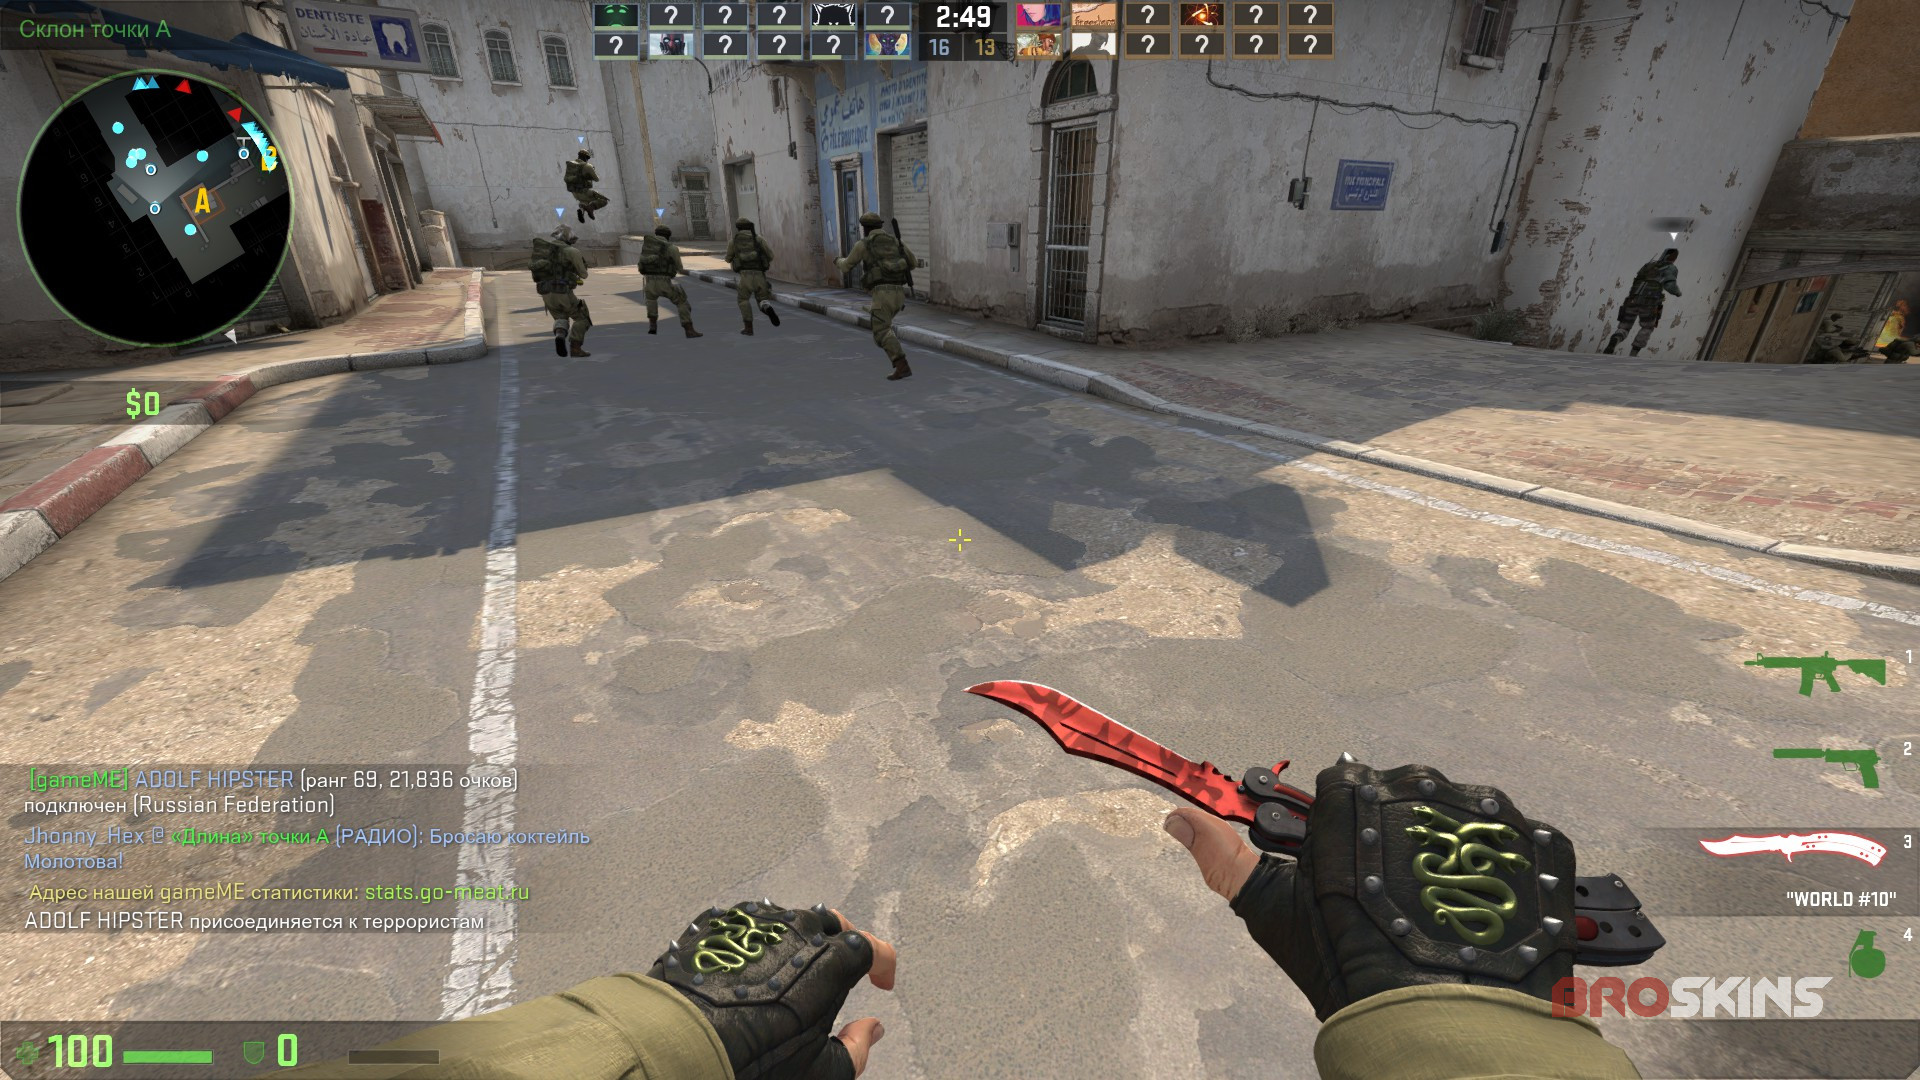 Butterfly Knife Slaughter + Hydra Gloves Emerald Factory New